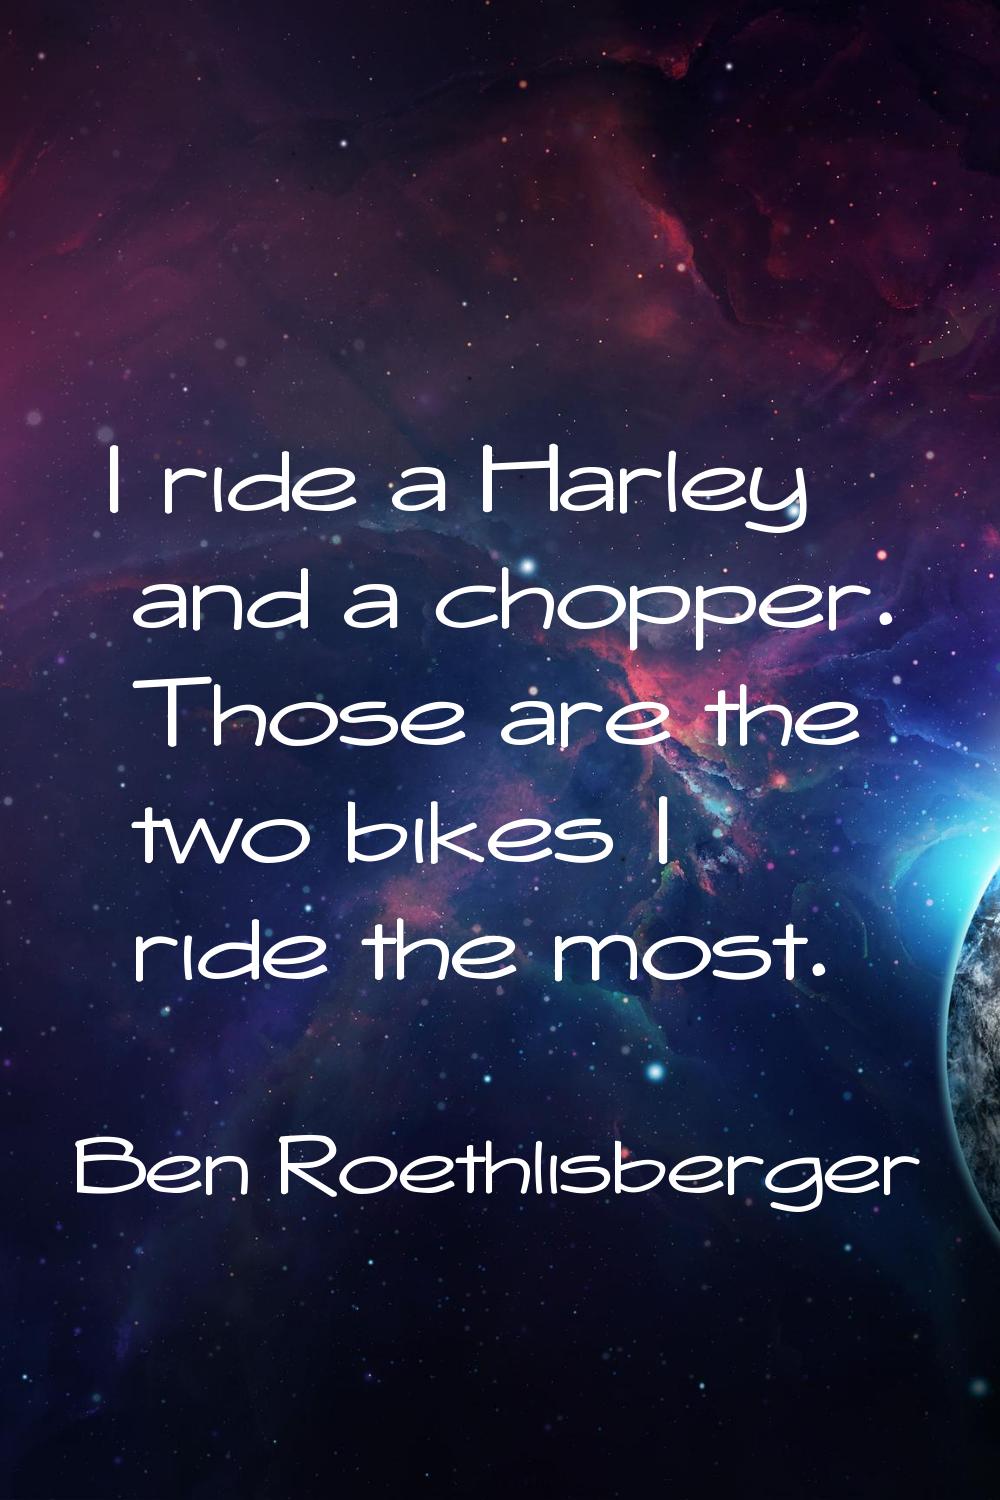 I ride a Harley and a chopper. Those are the two bikes I ride the most.